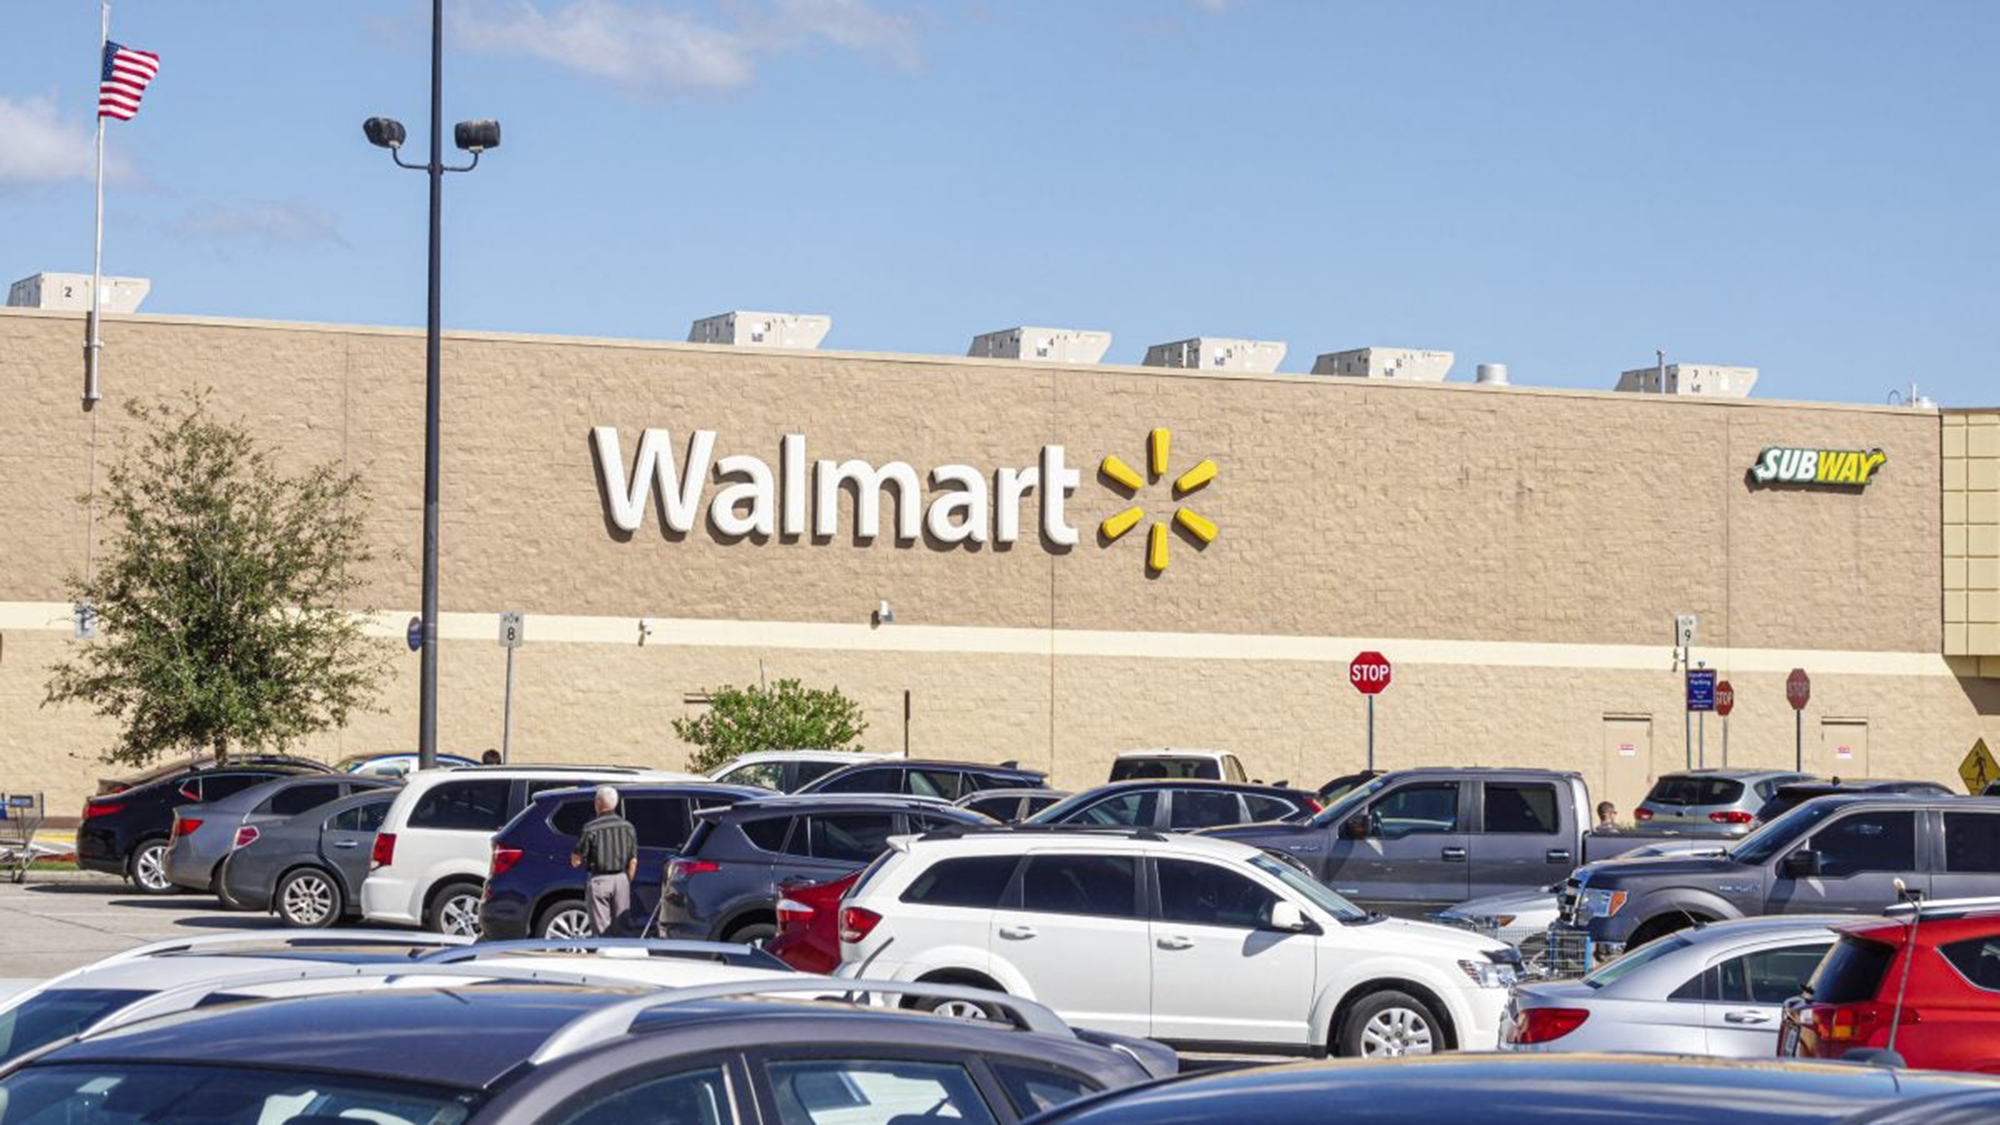 Two Black Men Trying to Return a TV Were Handcuffed, Sue Walmart Over Racial Incident